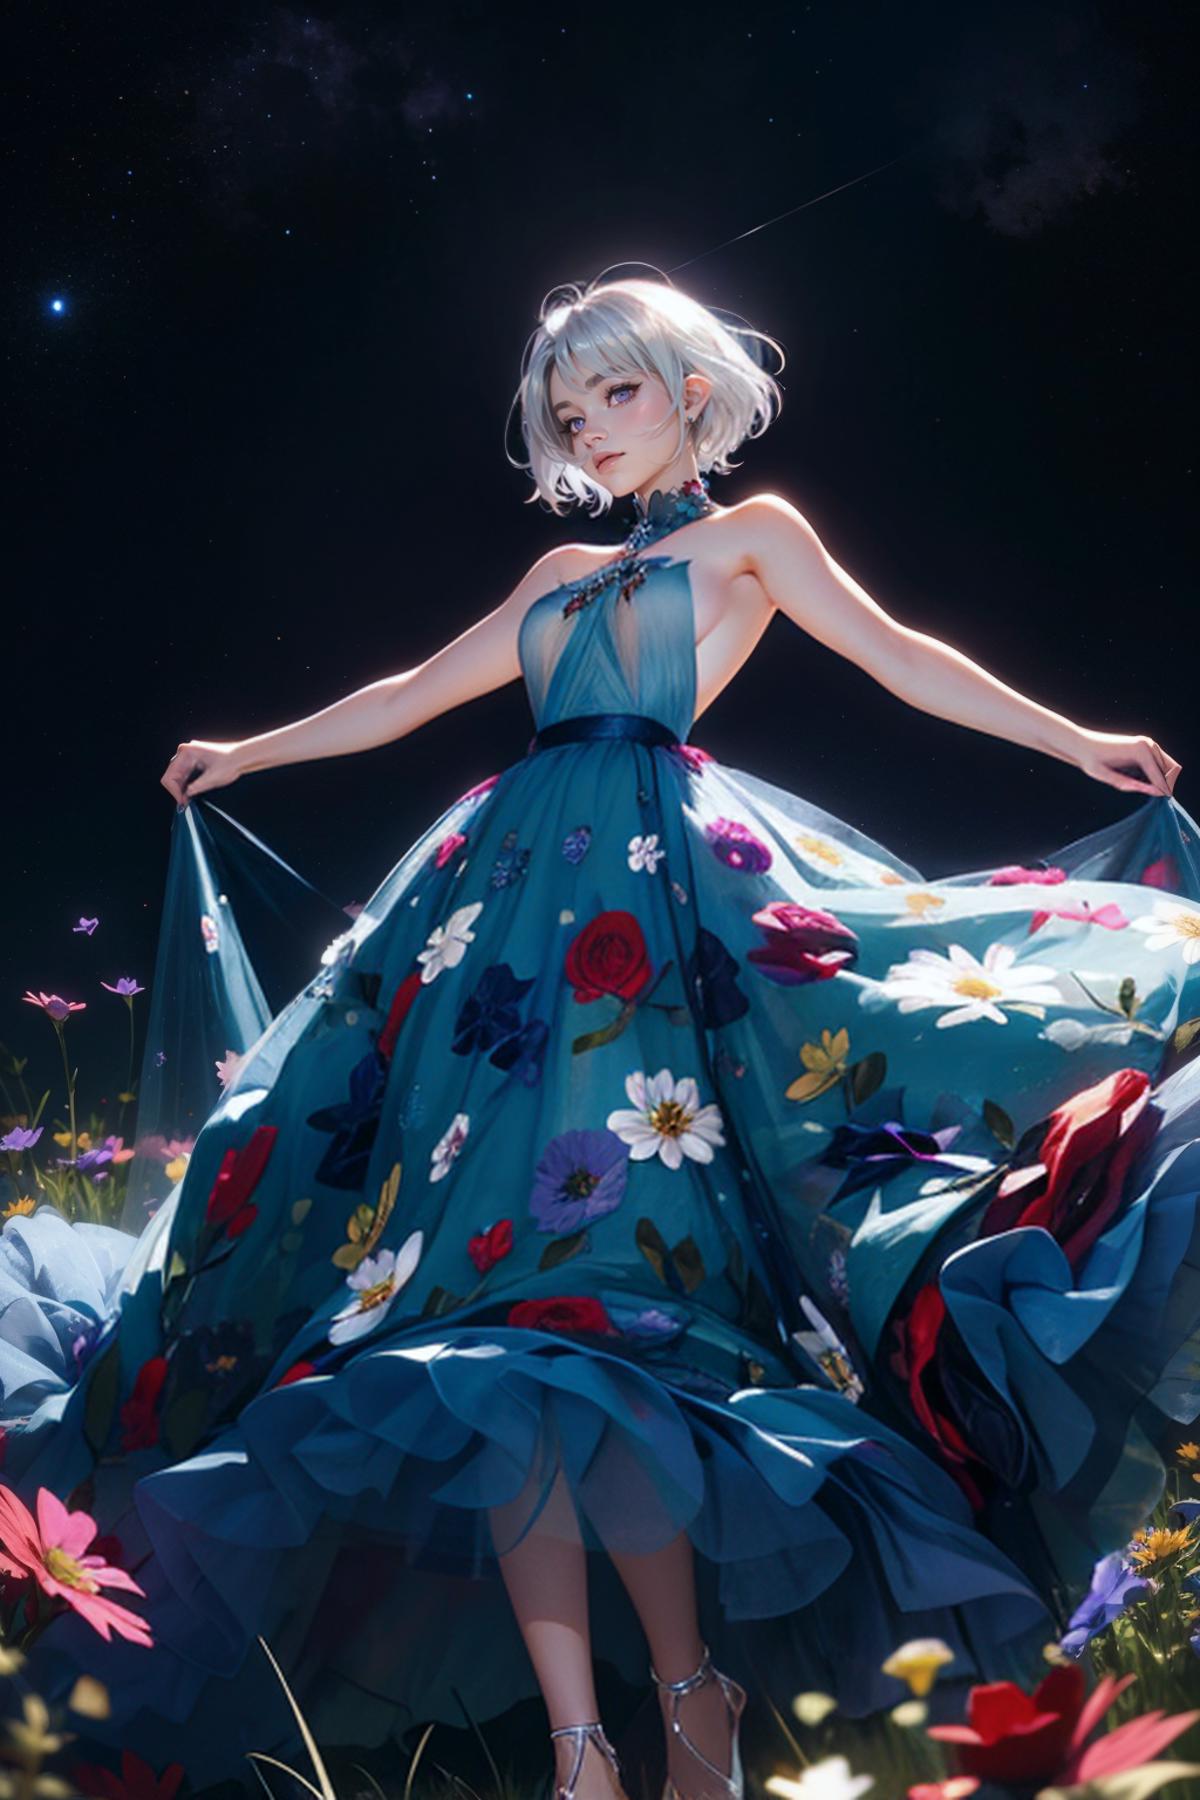 Blue & Flower Dress image by Arkaivist